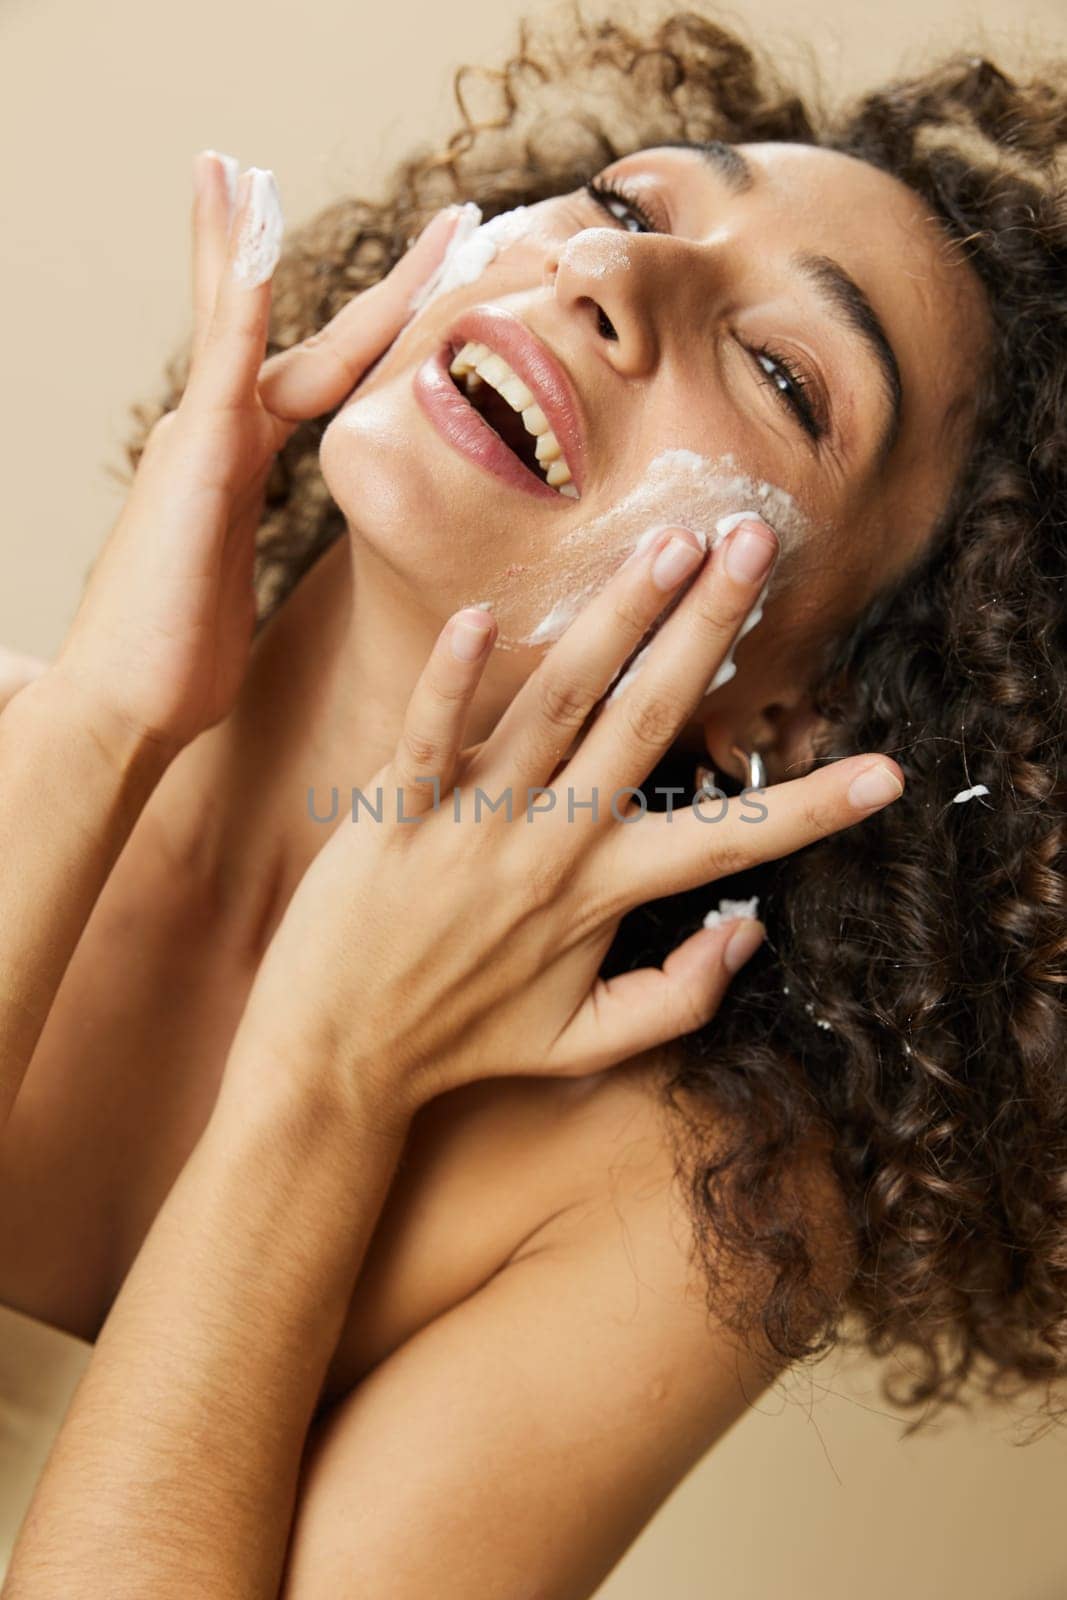 Woman beauty face close-up applying foam to wash and cleanse skin with fingers of her hand, nail and hair health, hair dryer style curly afro hair, body and beauty care concept by SHOTPRIME